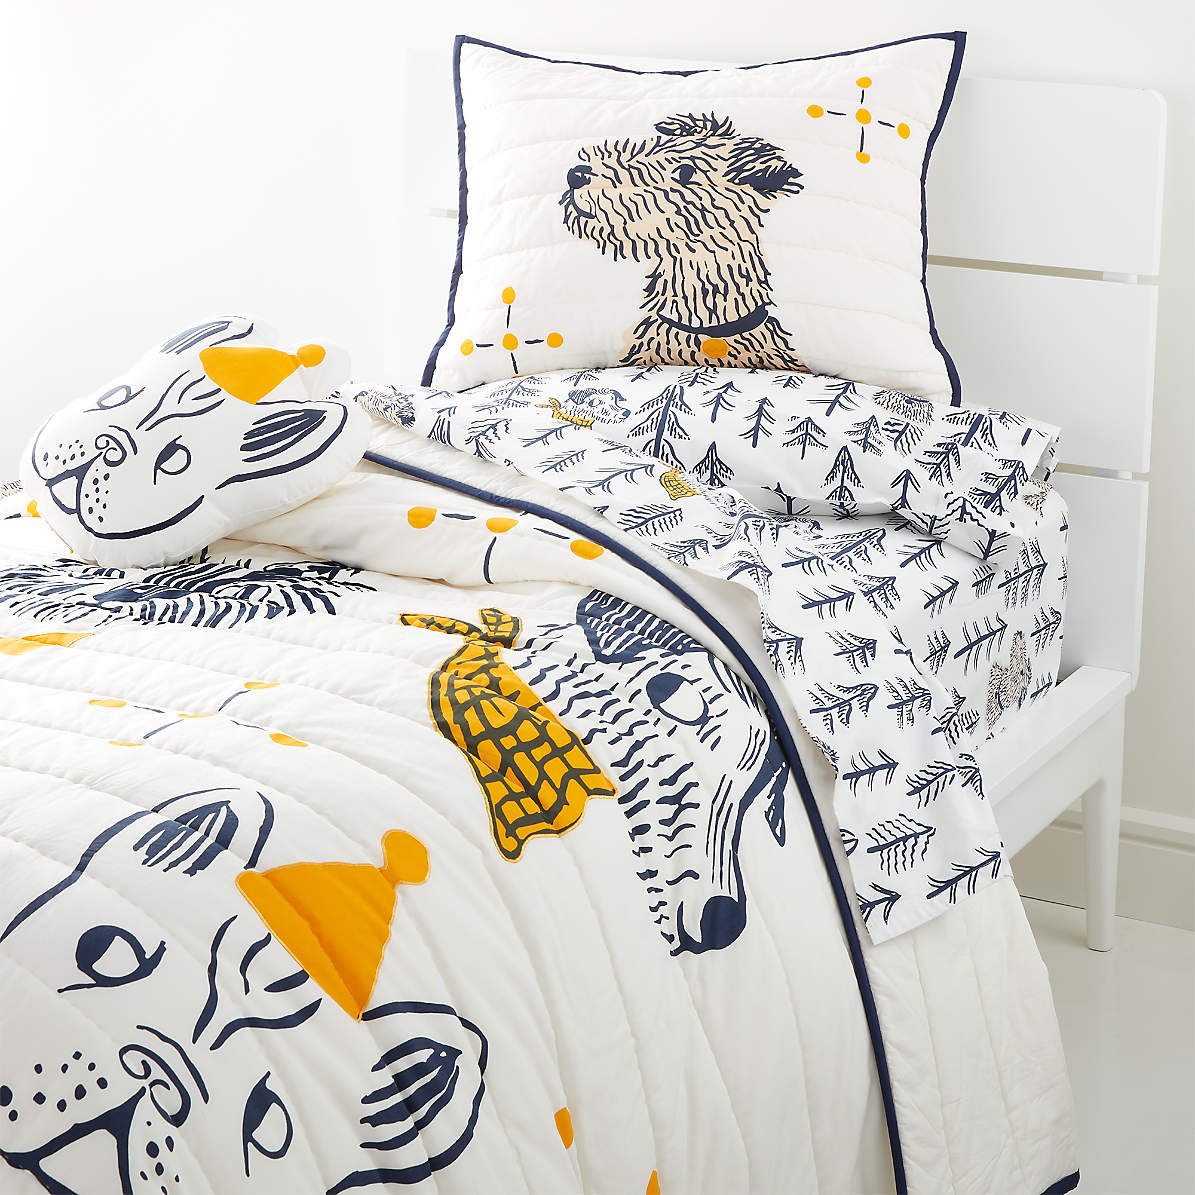 Bedding Set Duvet Covers Fire Dog Animal Printed Bedclothes Fabric Home Textiles